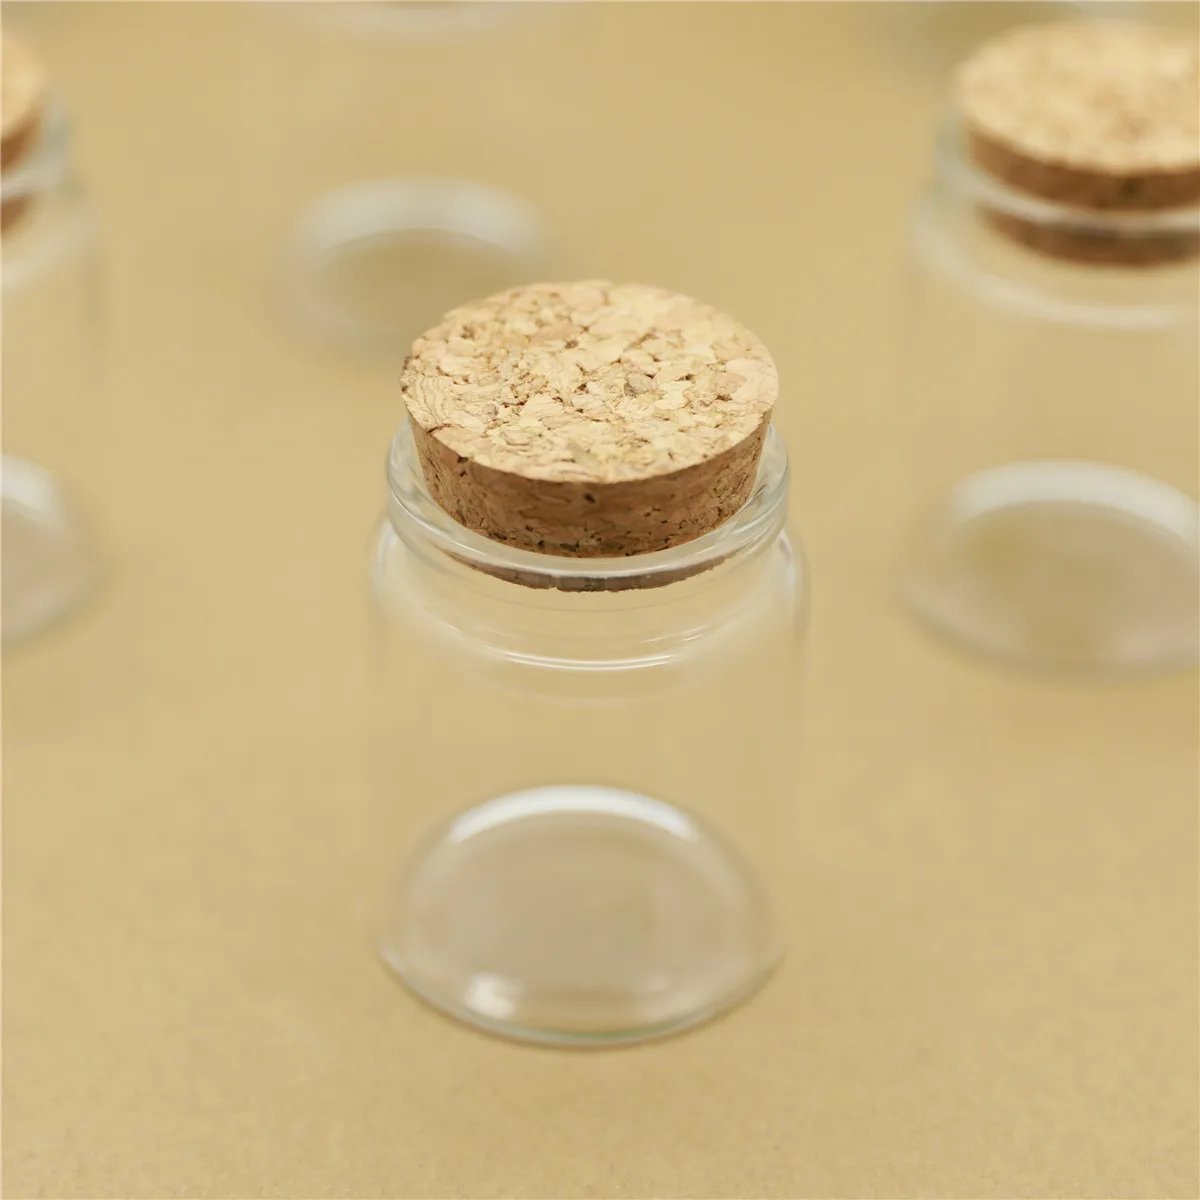 30 Pack, 7 oz Glass Favor Jars with Cork Lids, Glass Pudding jars, Glass  Contain